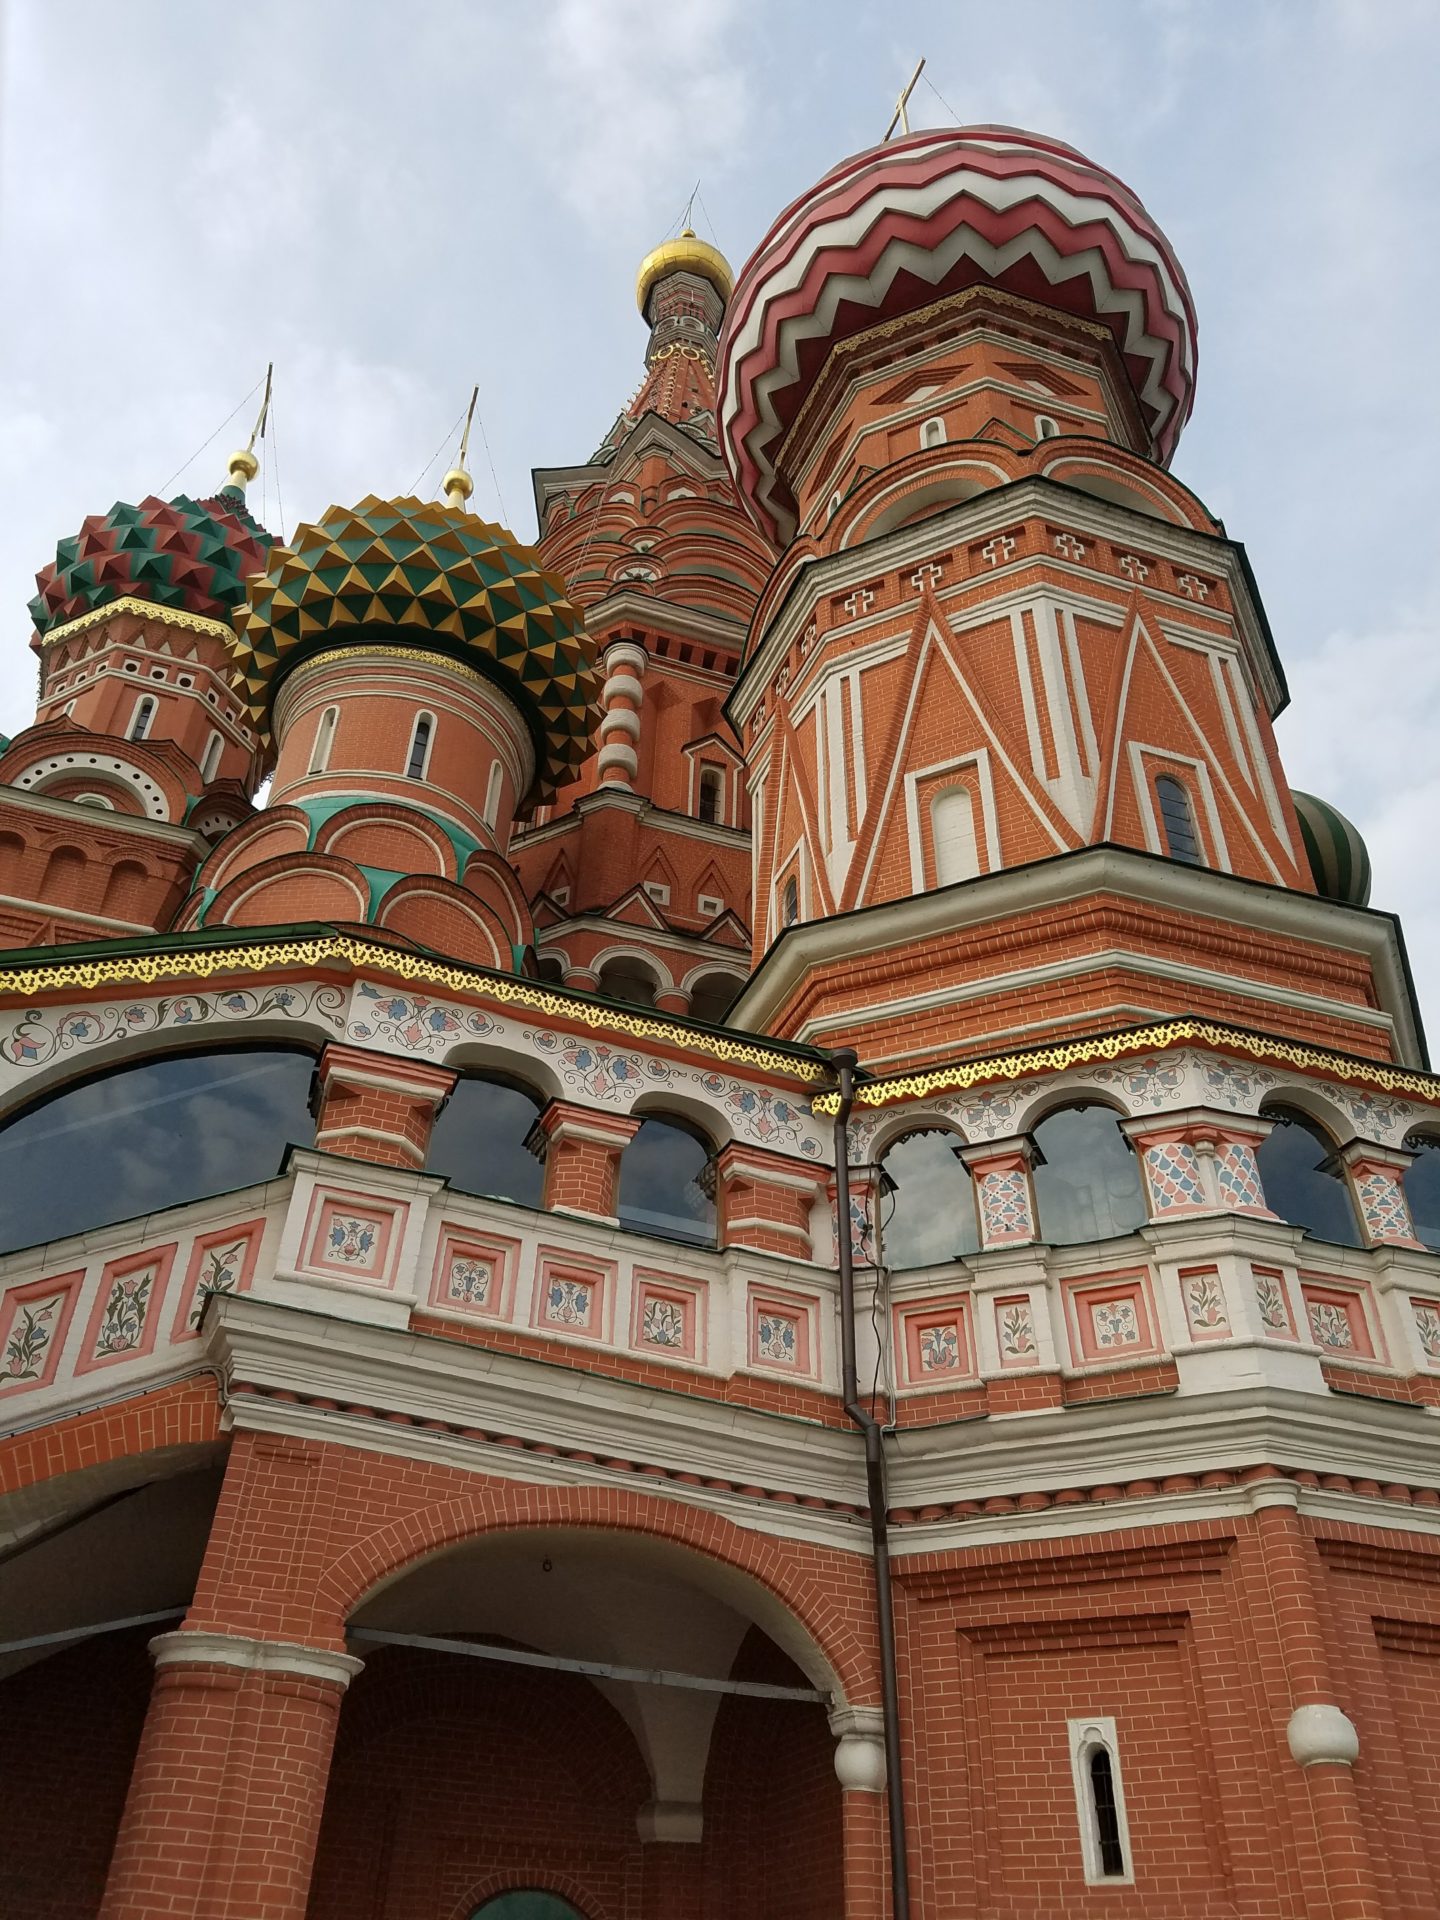 a large building with colorful domes